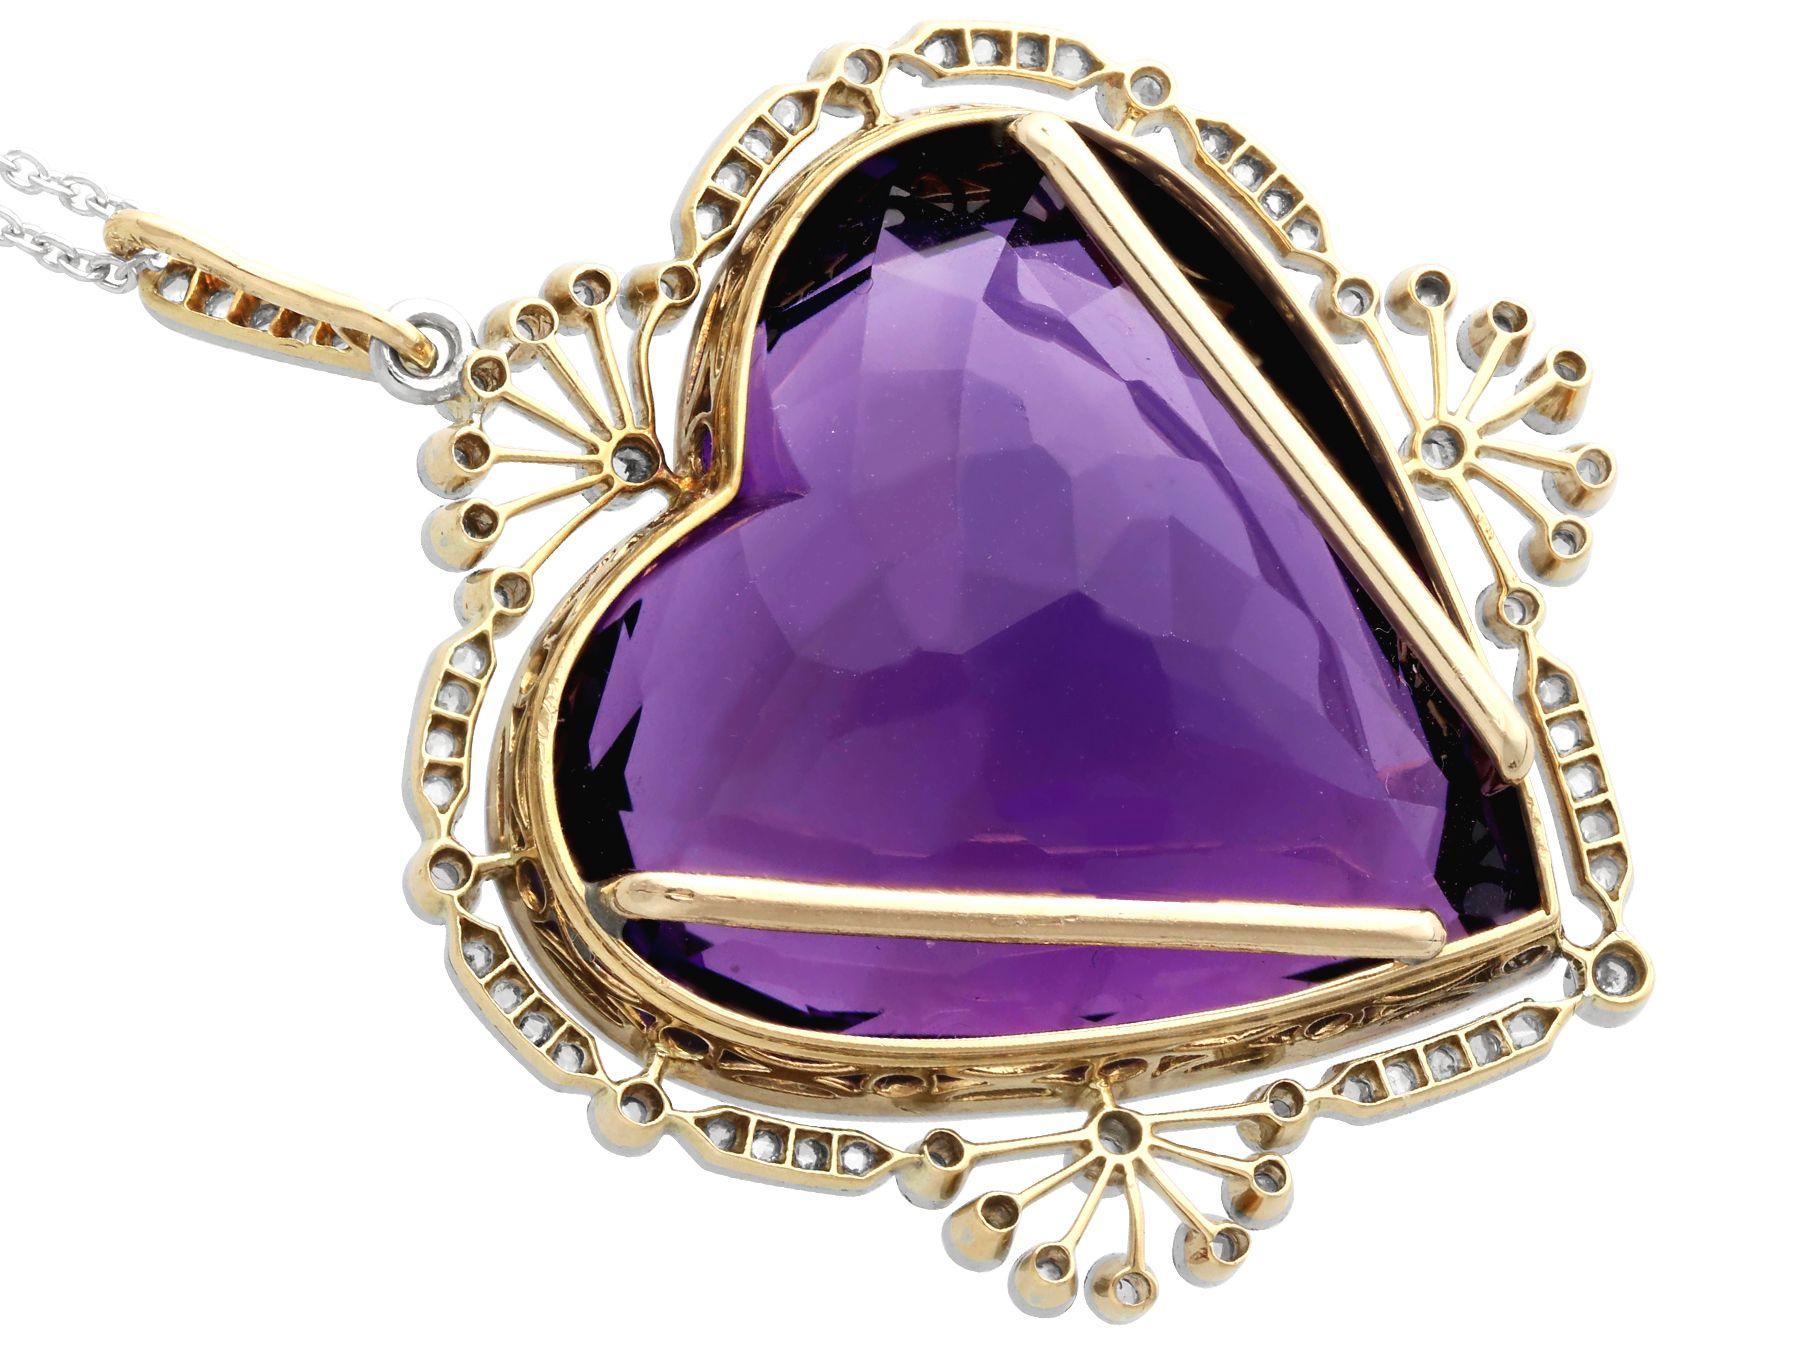 Antique 45.27 Carat Amethyst and Diamond Yellow Gold Heart Pendant In Excellent Condition For Sale In Jesmond, Newcastle Upon Tyne